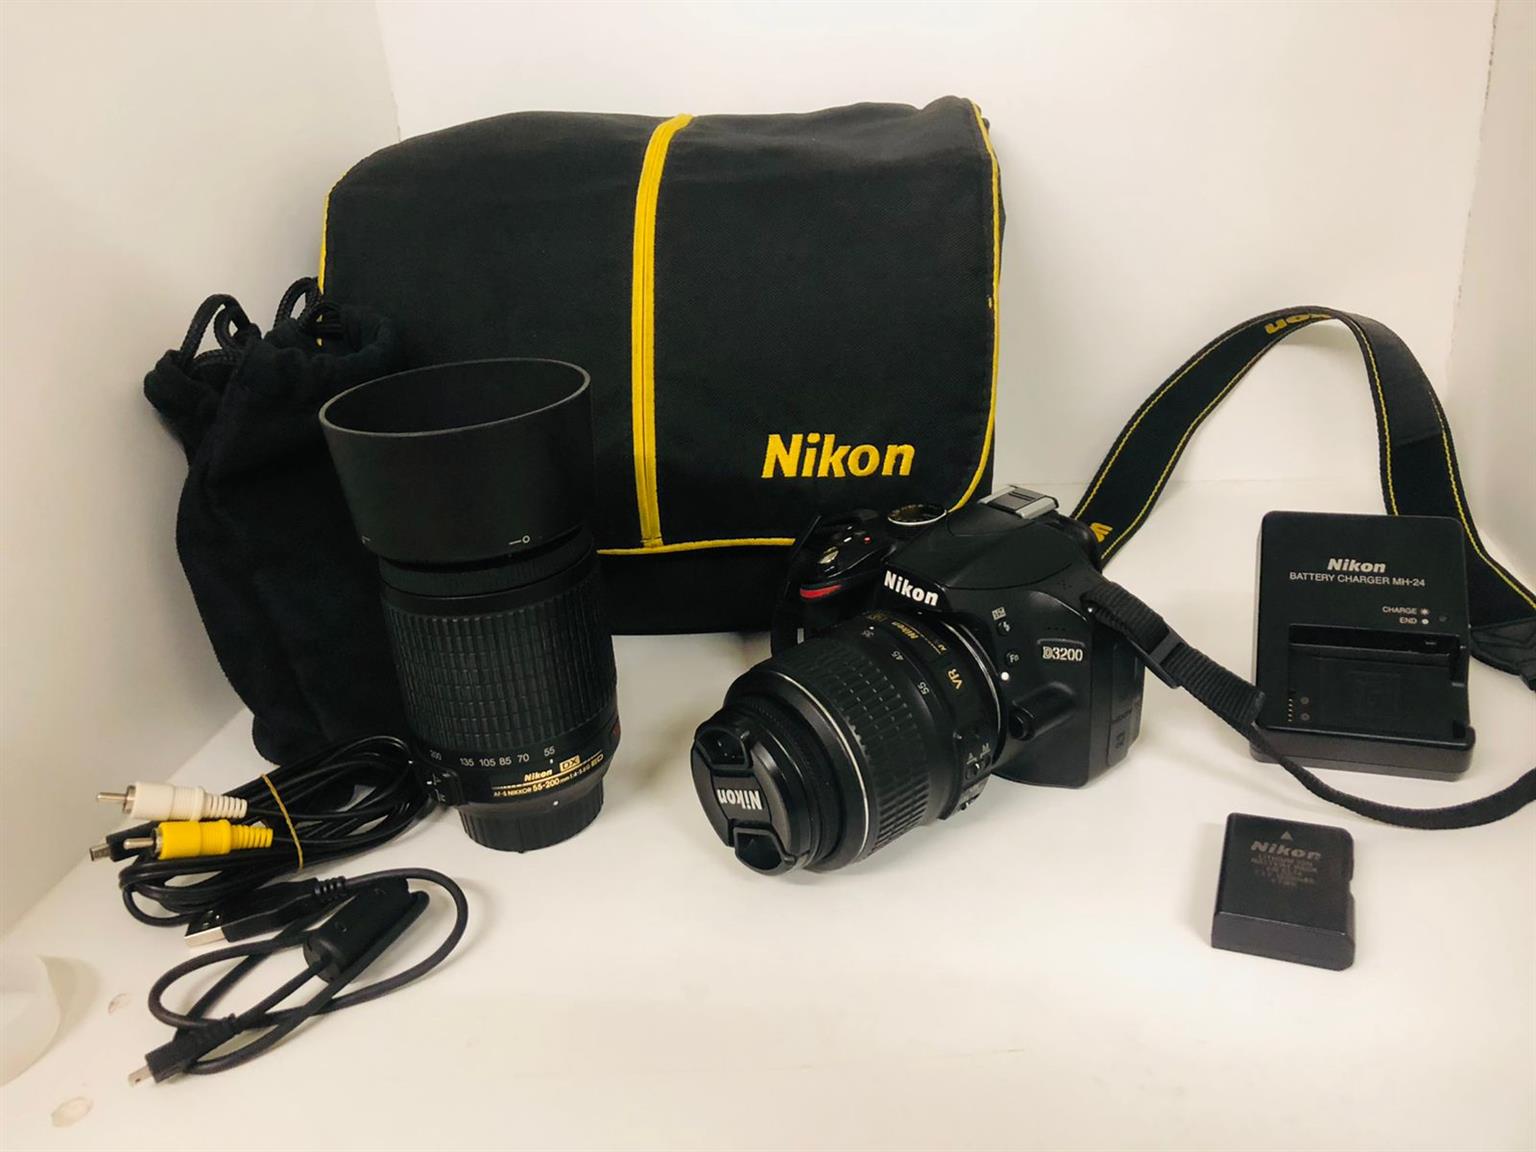 NIKON D3200 with 2 lens and accessories